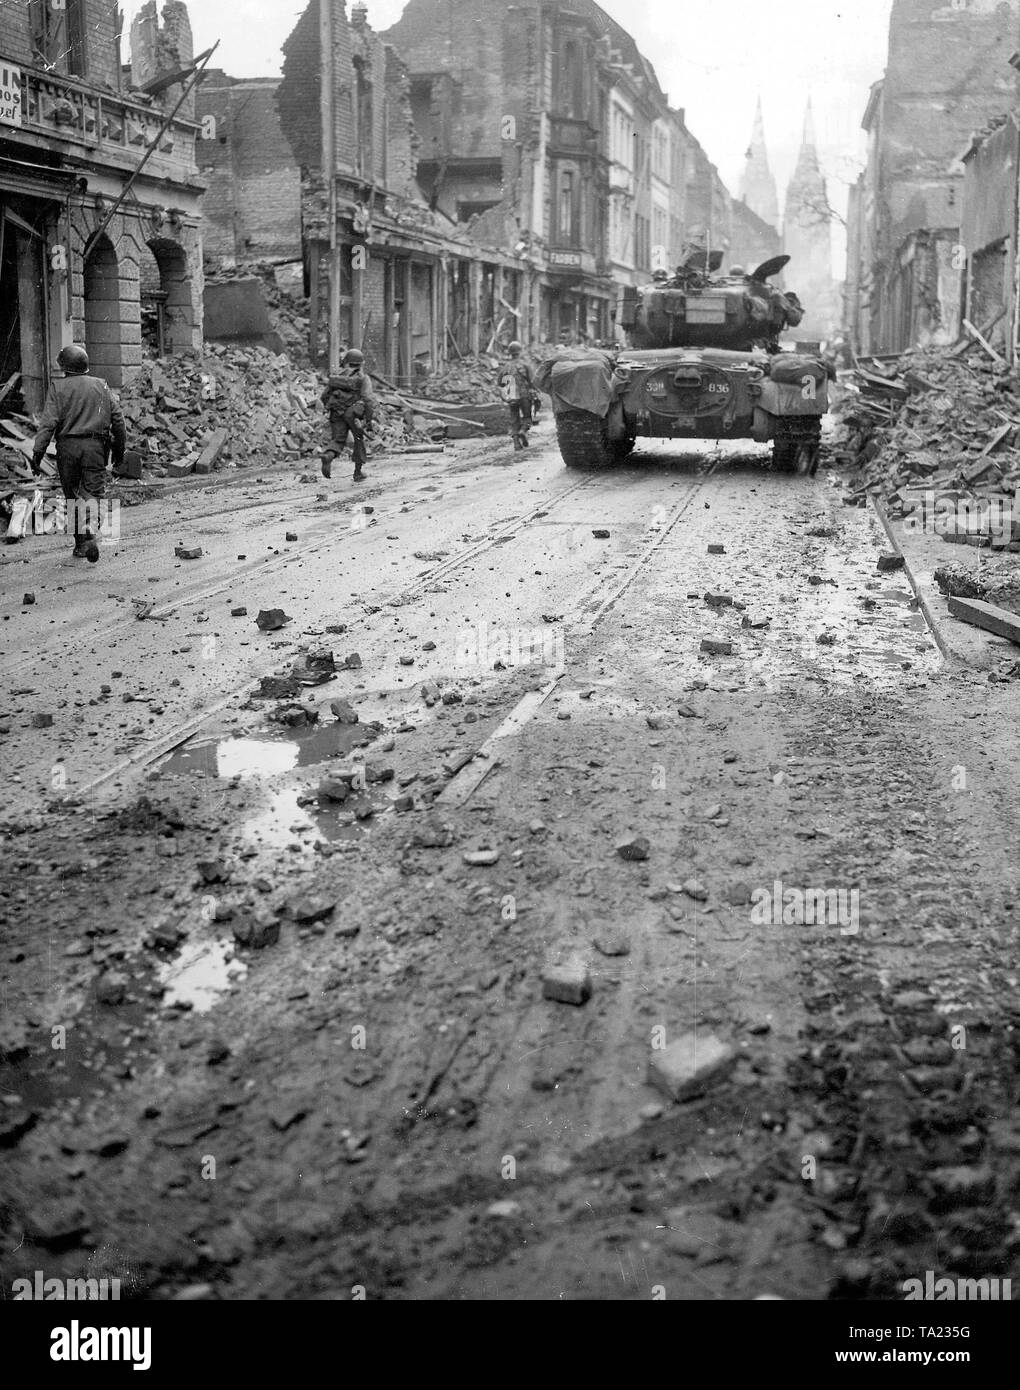 World War II: entry of American troops in Germany. The photo, taken by an American war correspondent, shows the top of the American infantry, here, protected by a heavy 'Pershing' of the 3rd Armored Division, as they fight the way through one of the heavily damaged streets of the Cologne city center towards the Cologne Dom, that is visible in the background. Stock Photo